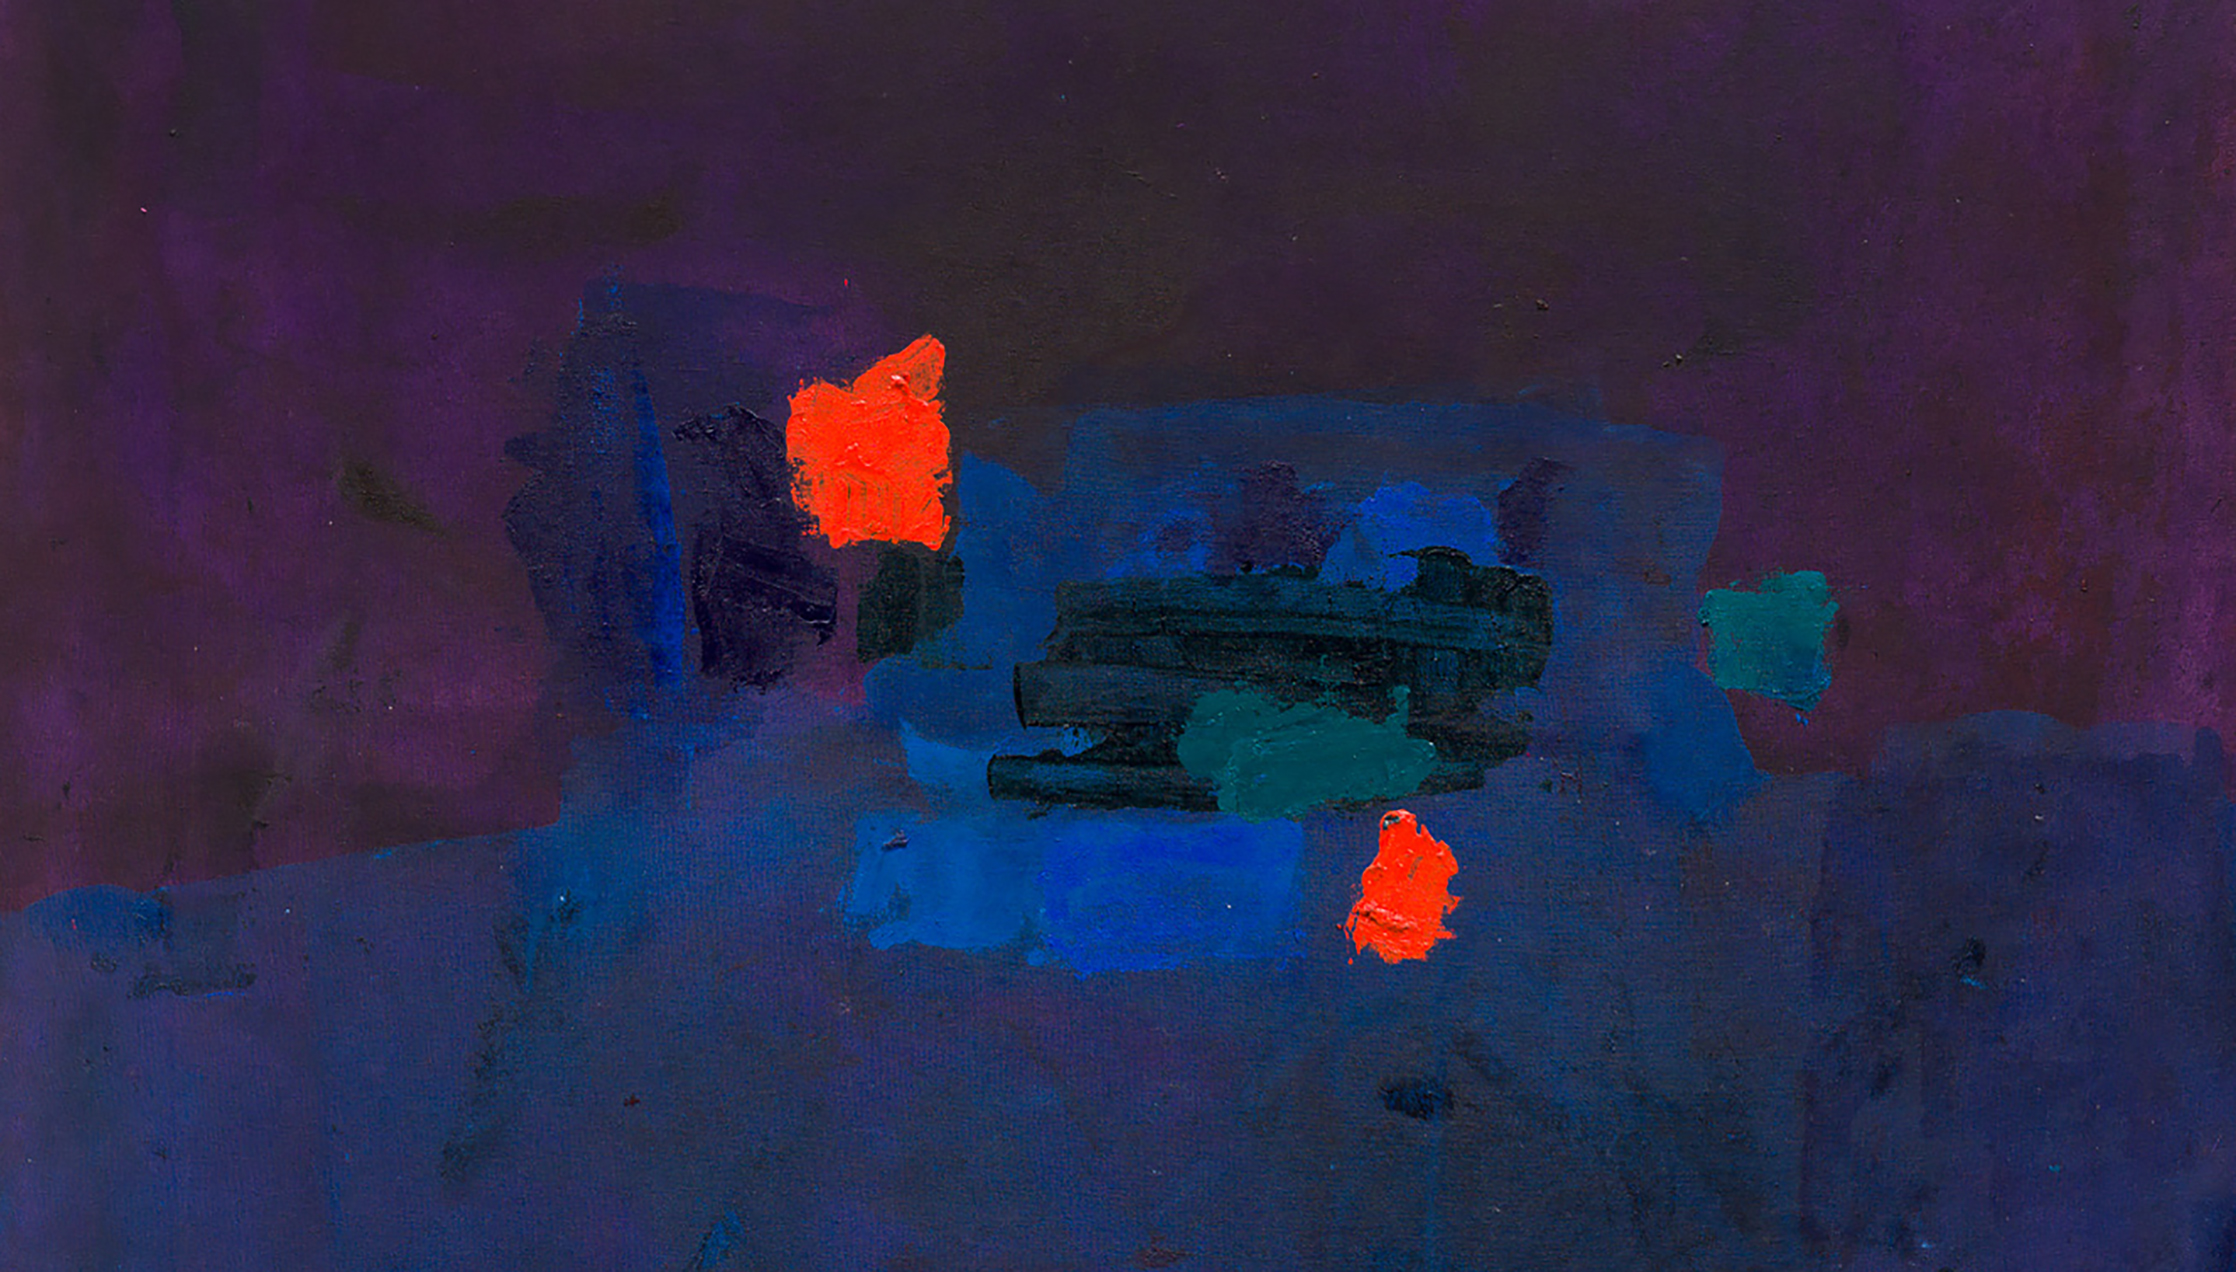 Ron Stonier, Untitled, 1970s, acrylic on canvas, 175.3 x 155.0 cm. Collection of Sheila Cano. Photo: Blaine Campbell.